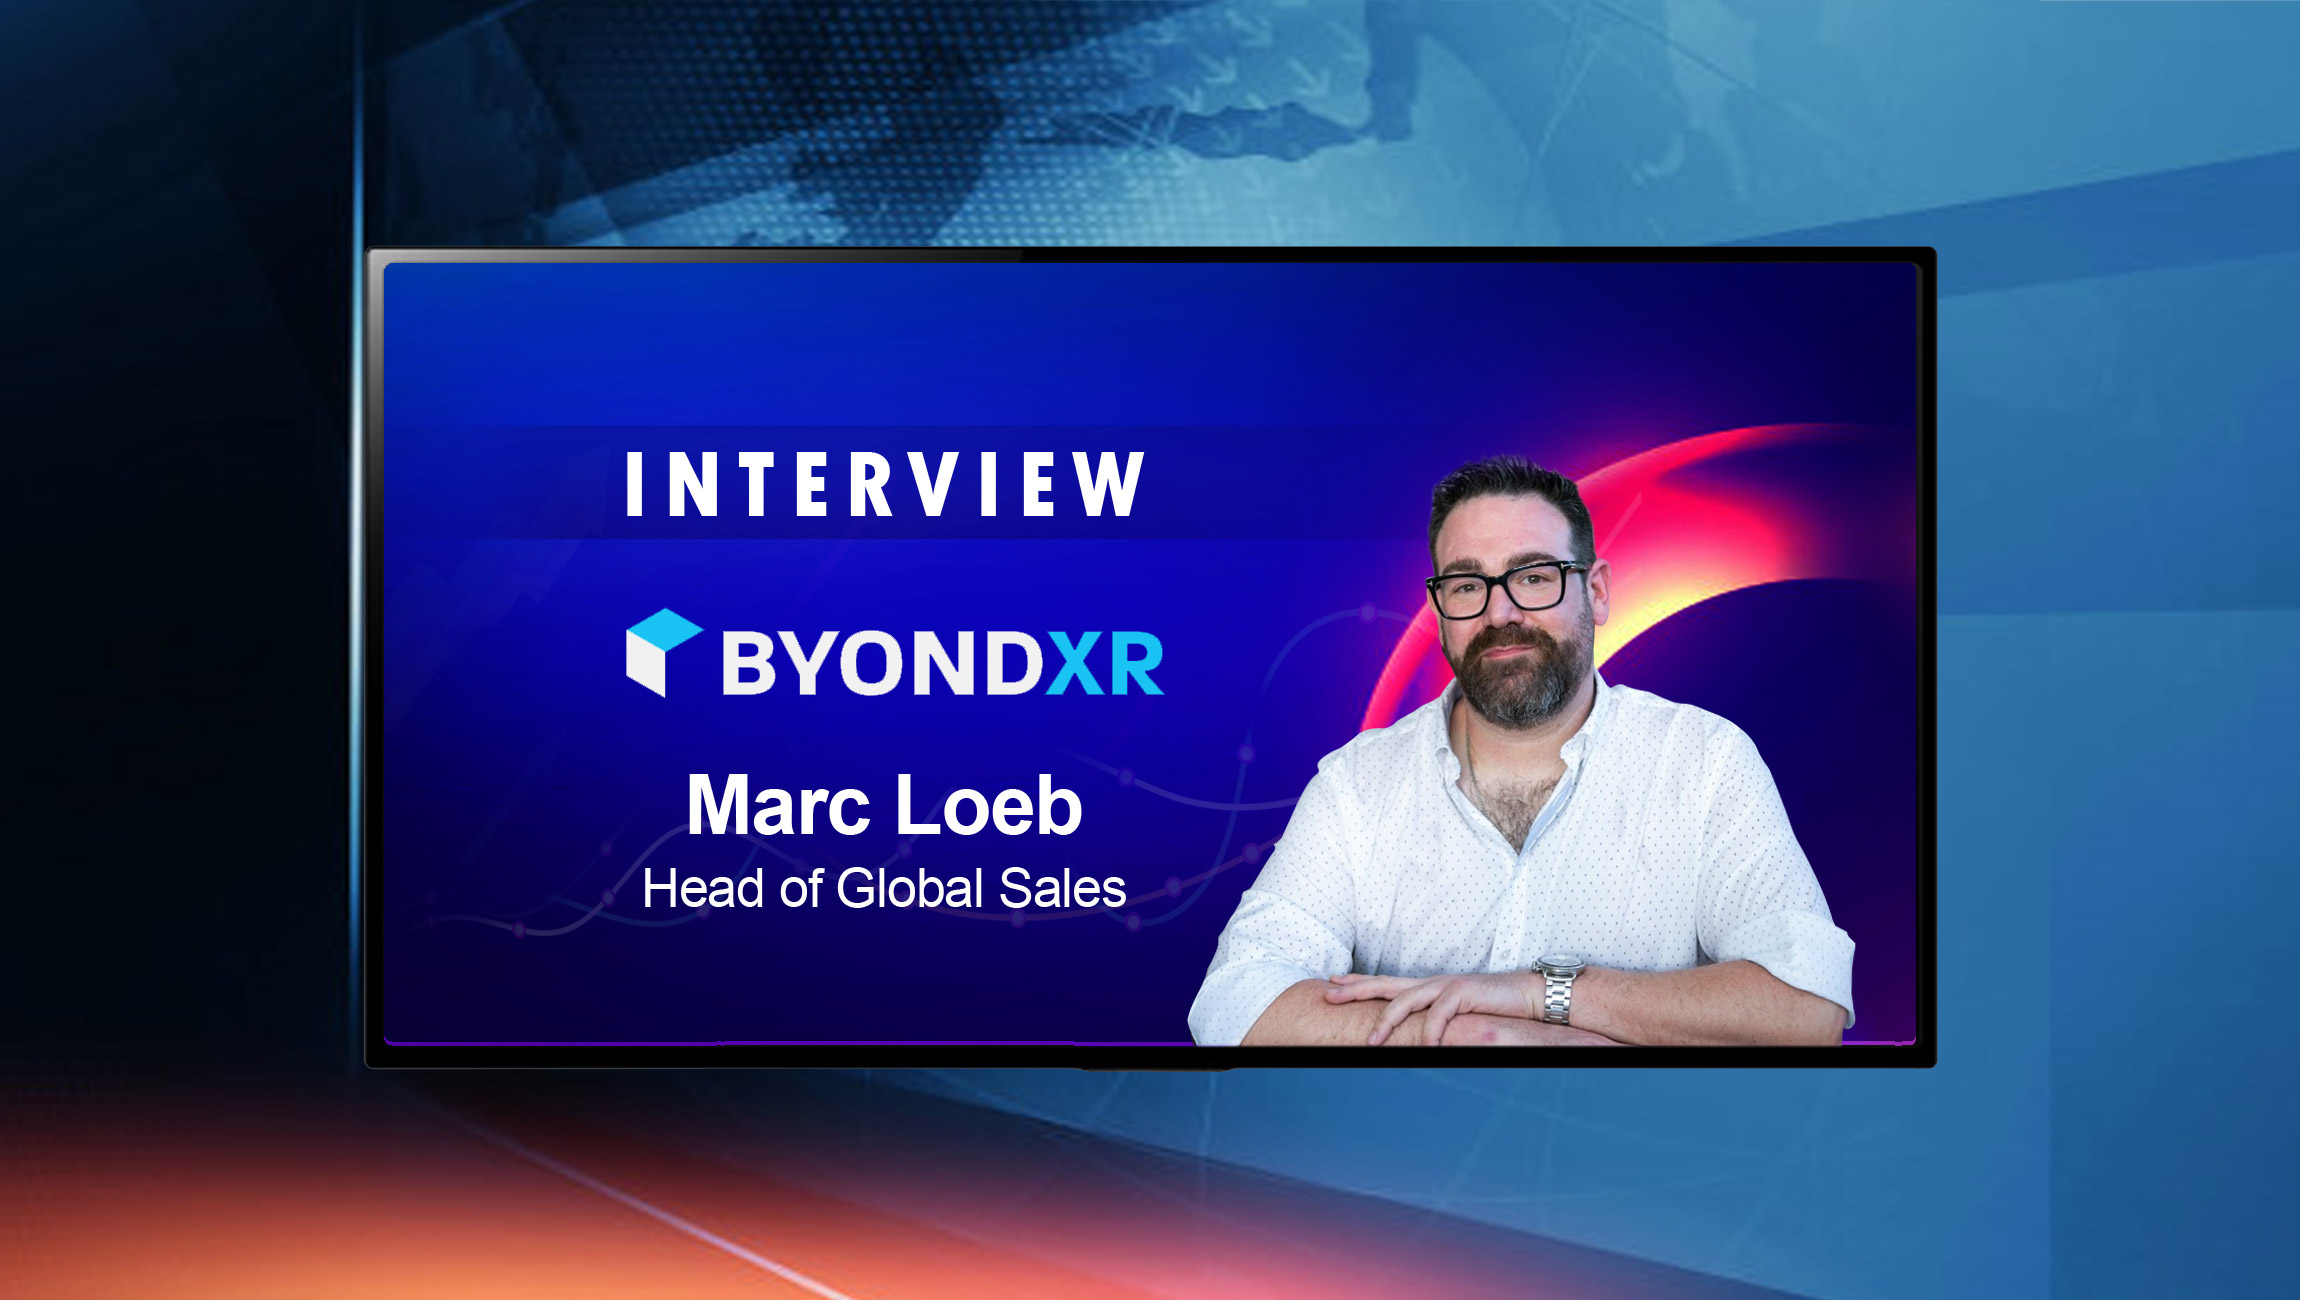 SalesTechStar Interview with Marc Loeb, Head of Global Sales at ByondXR